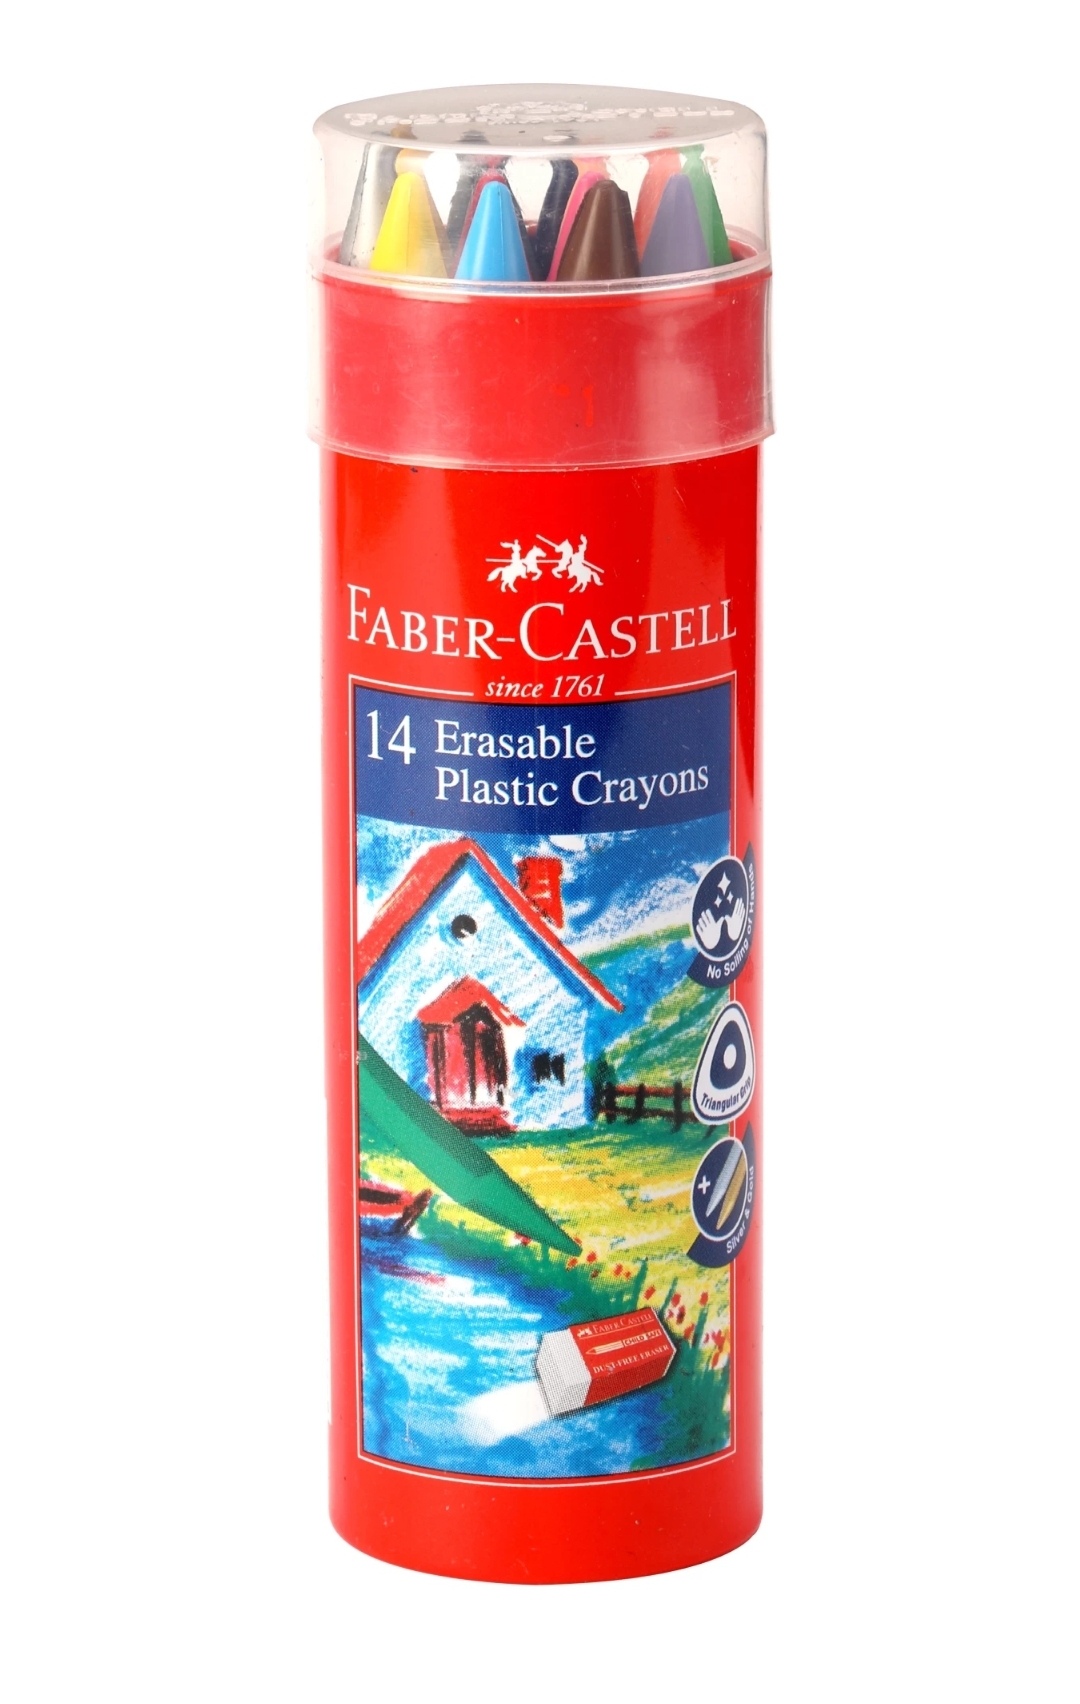 Faber Castell Erasable Plastic Crayons Tin Set of 14 Shades